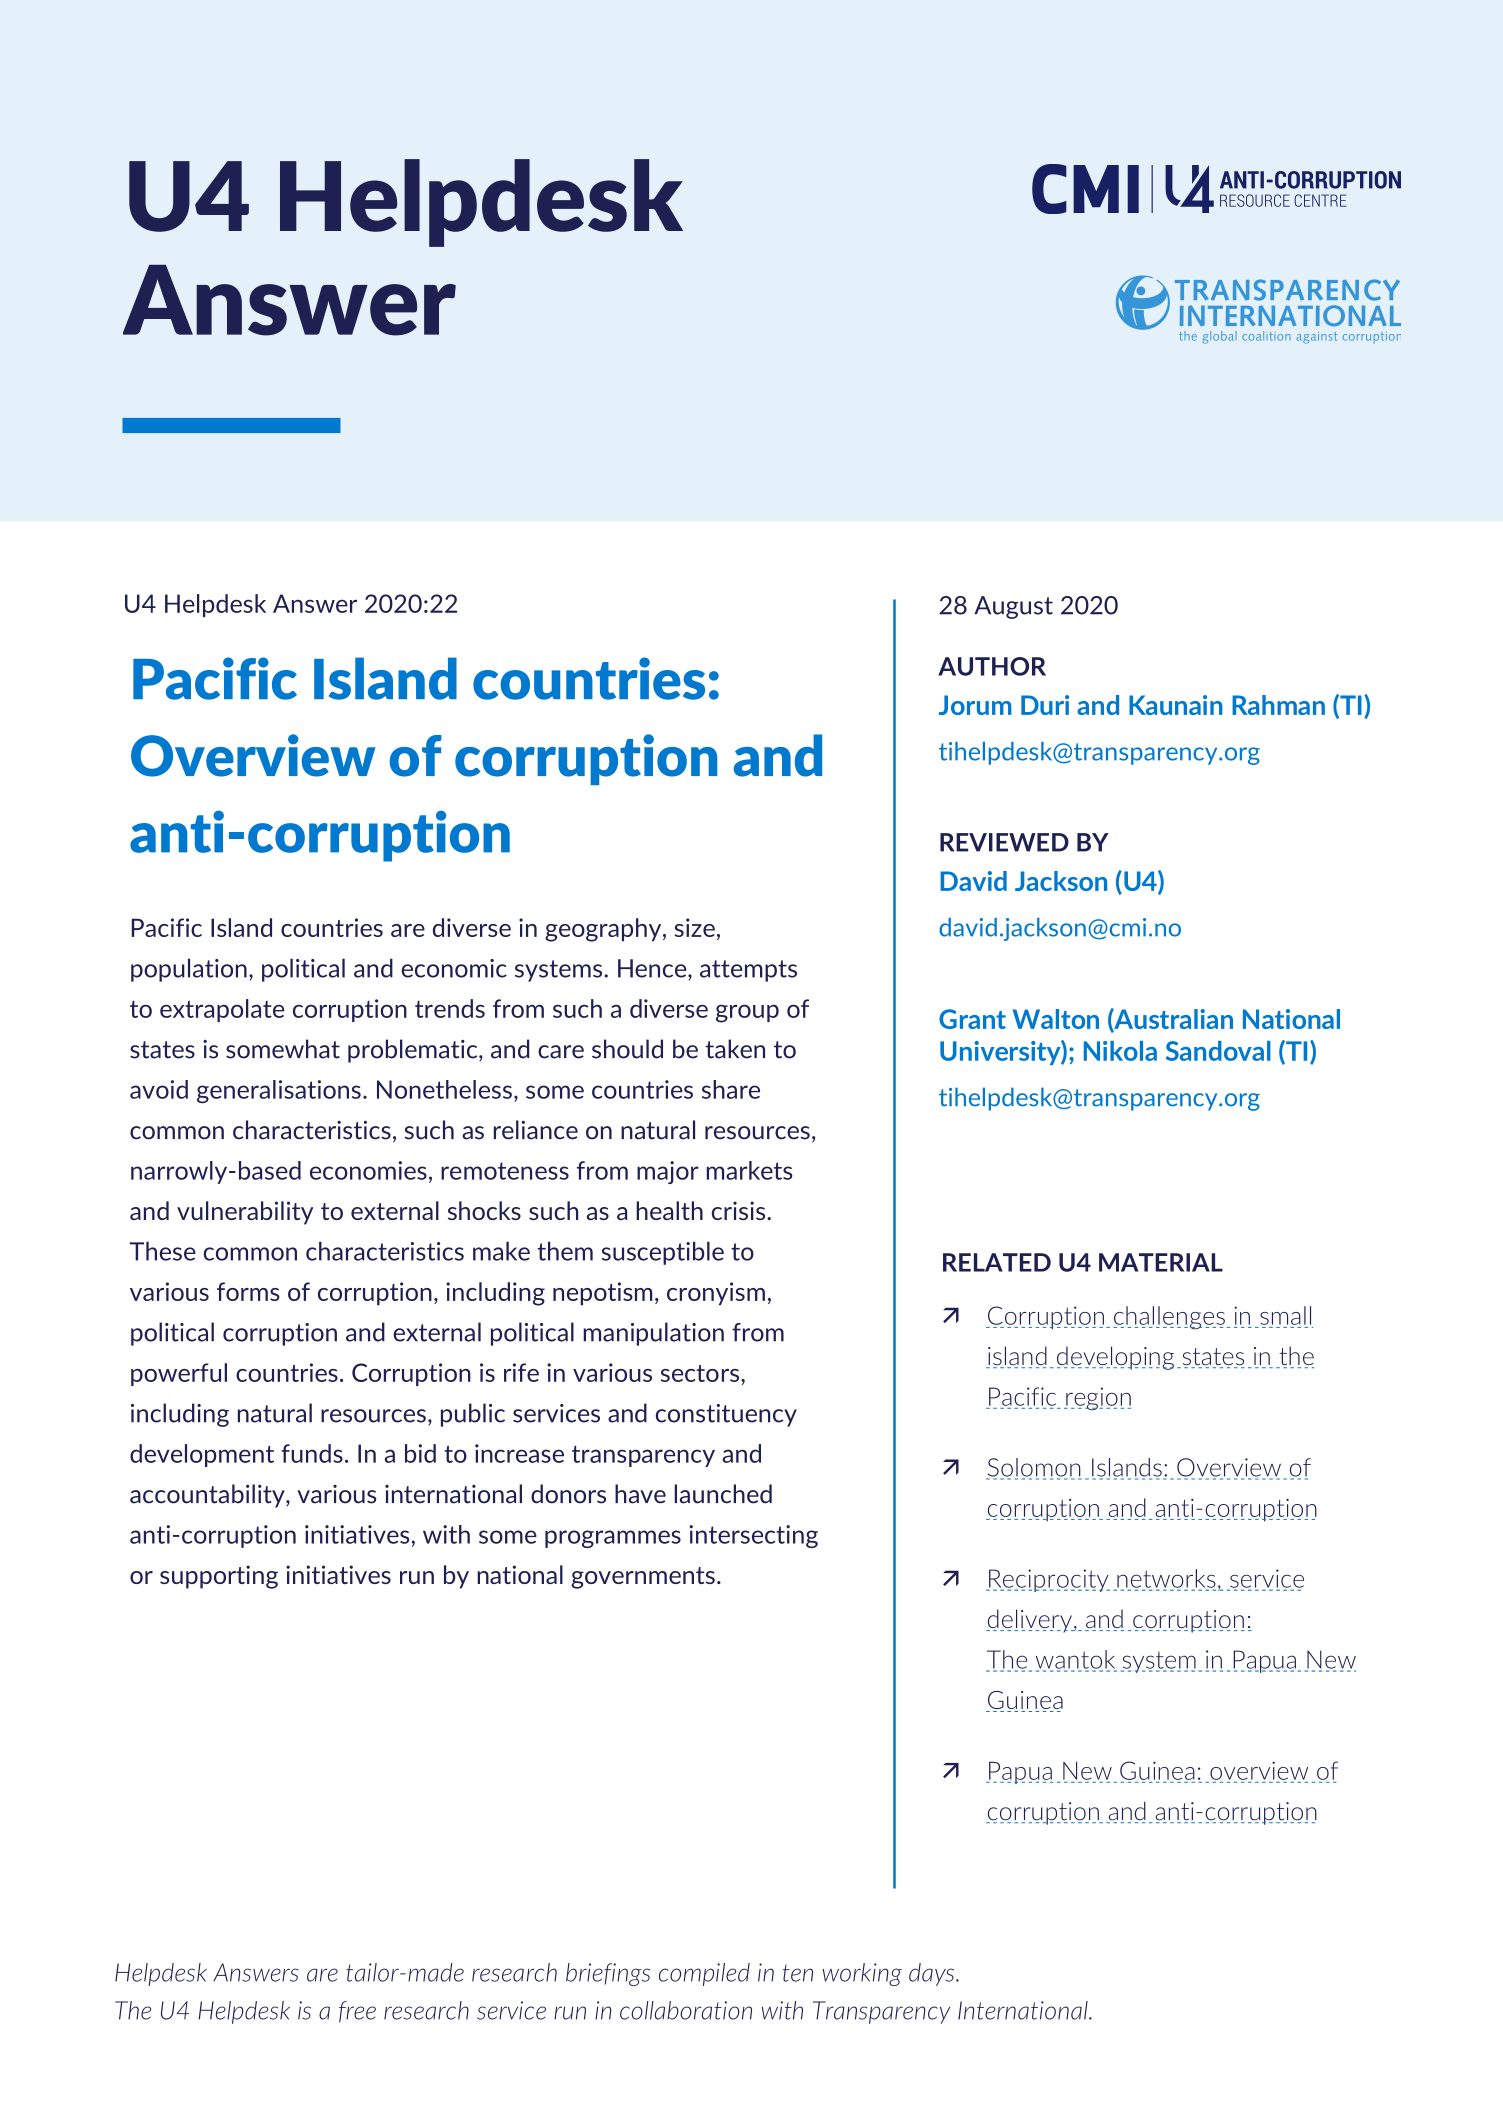 Pacific Island countries: Overview of corruption and anti-corruption